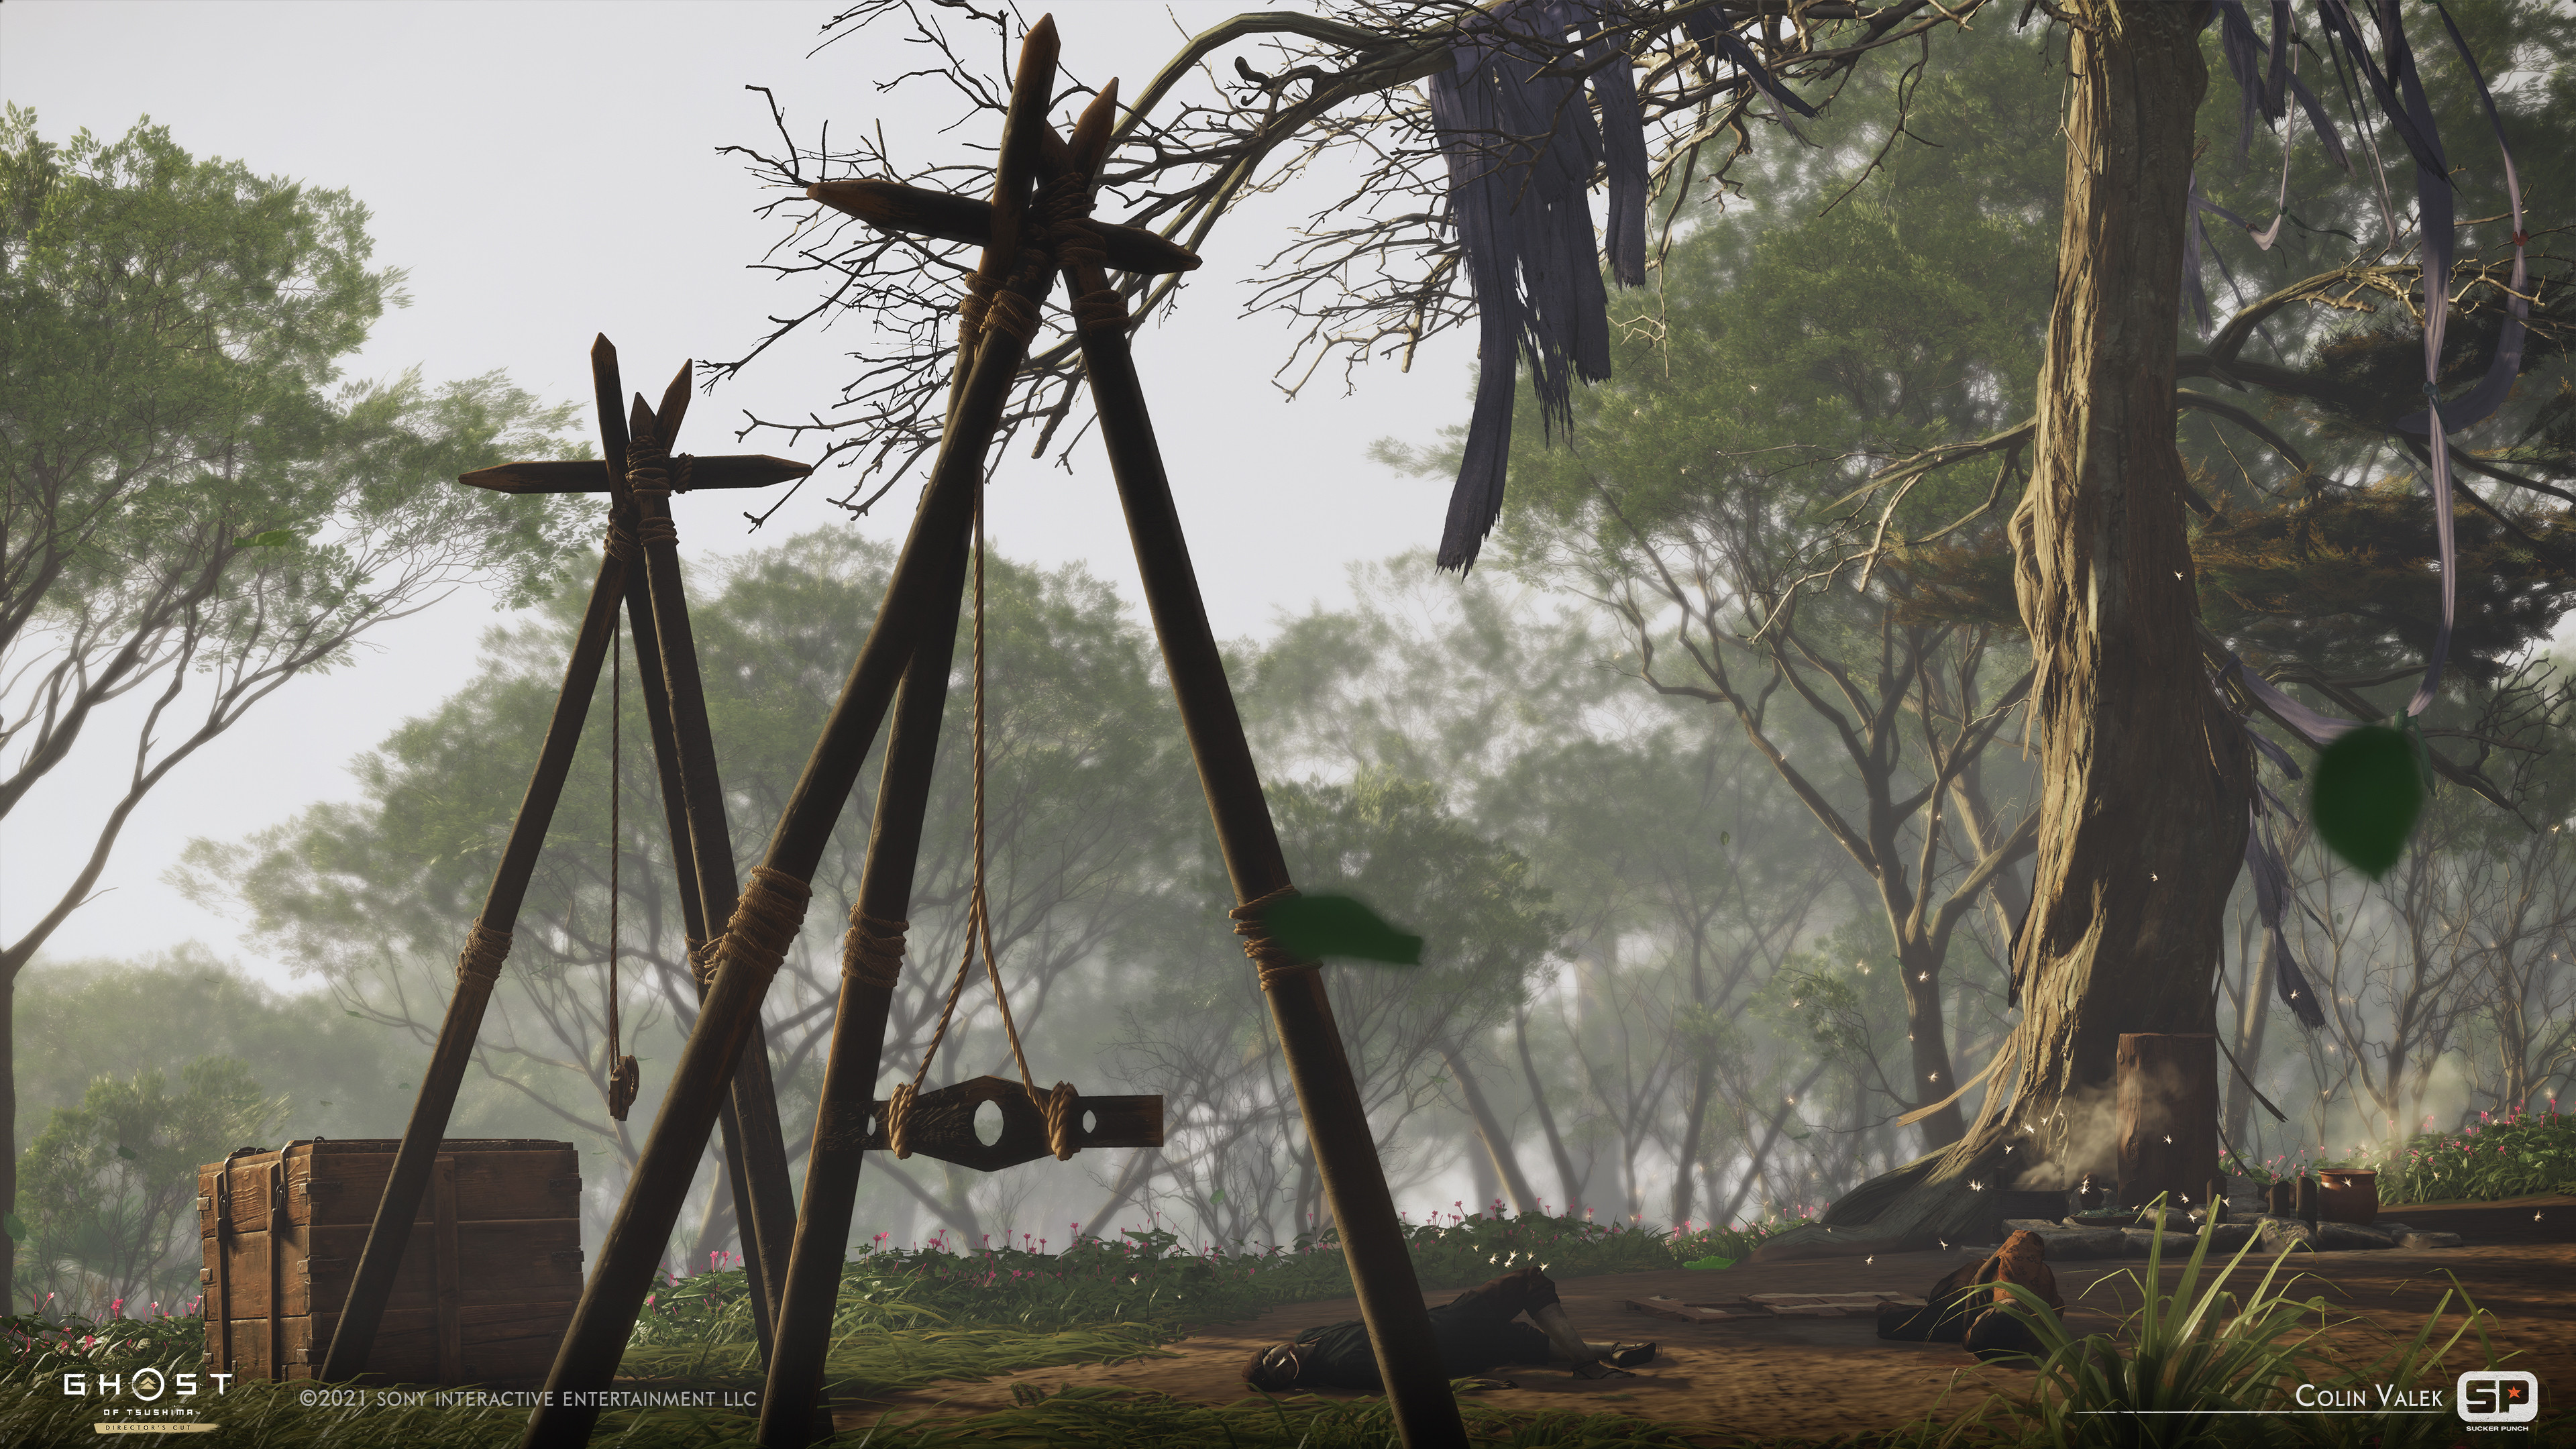 Environment/Prop set dressing, hanging shaman cloth added to trees.  